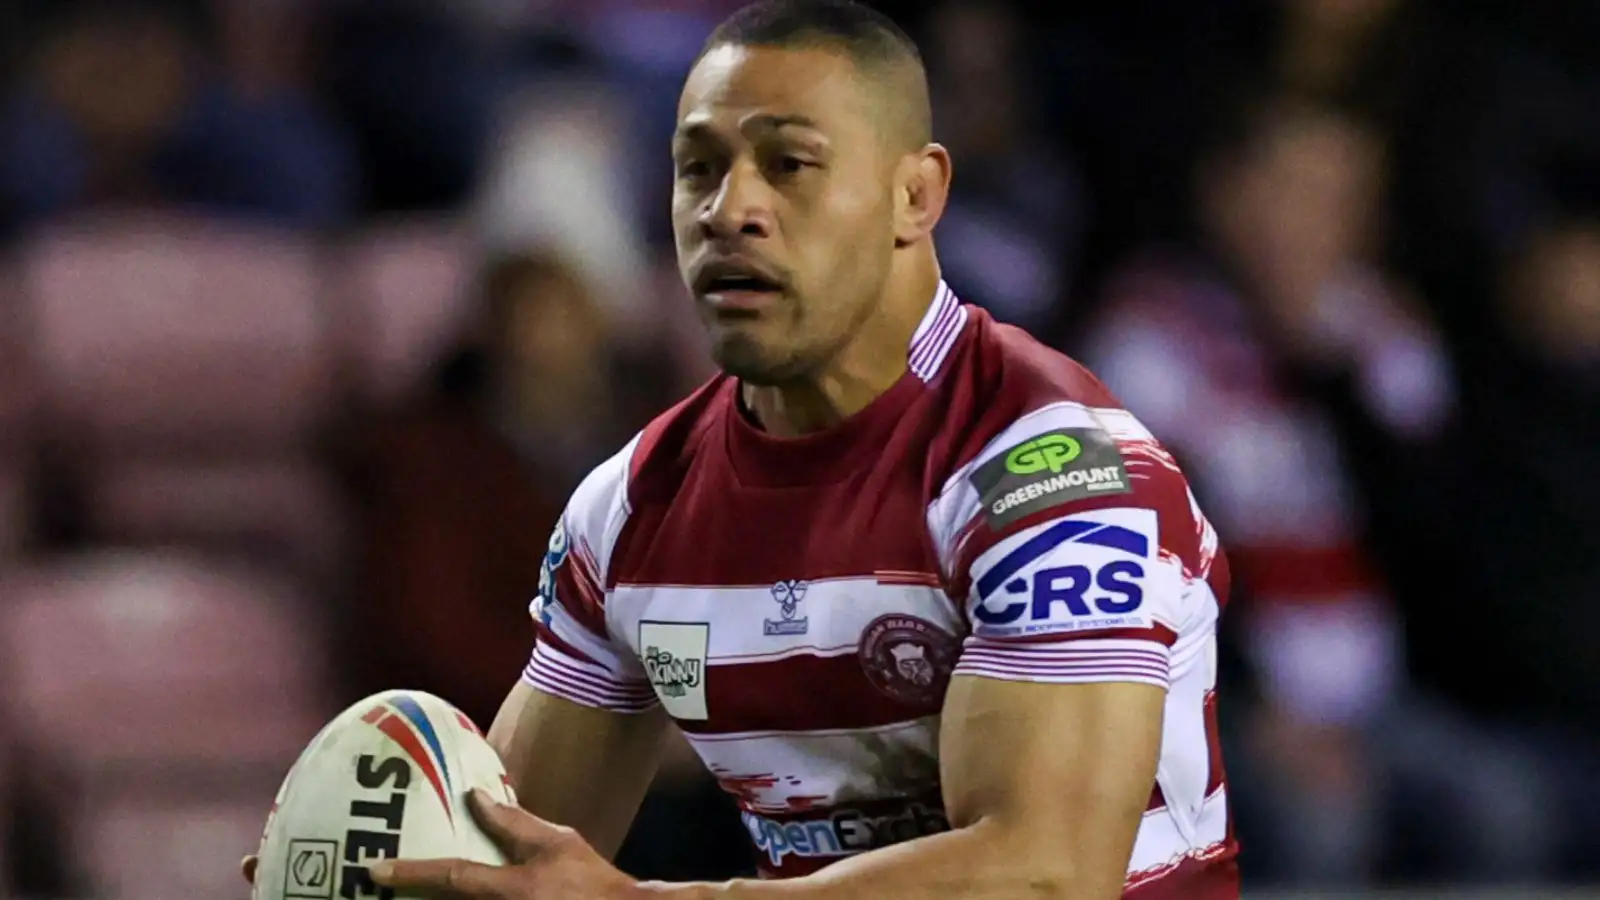 Wigan’s Willie Isa learns fate at tribunal ahead of much-anticipated Good Friday derby